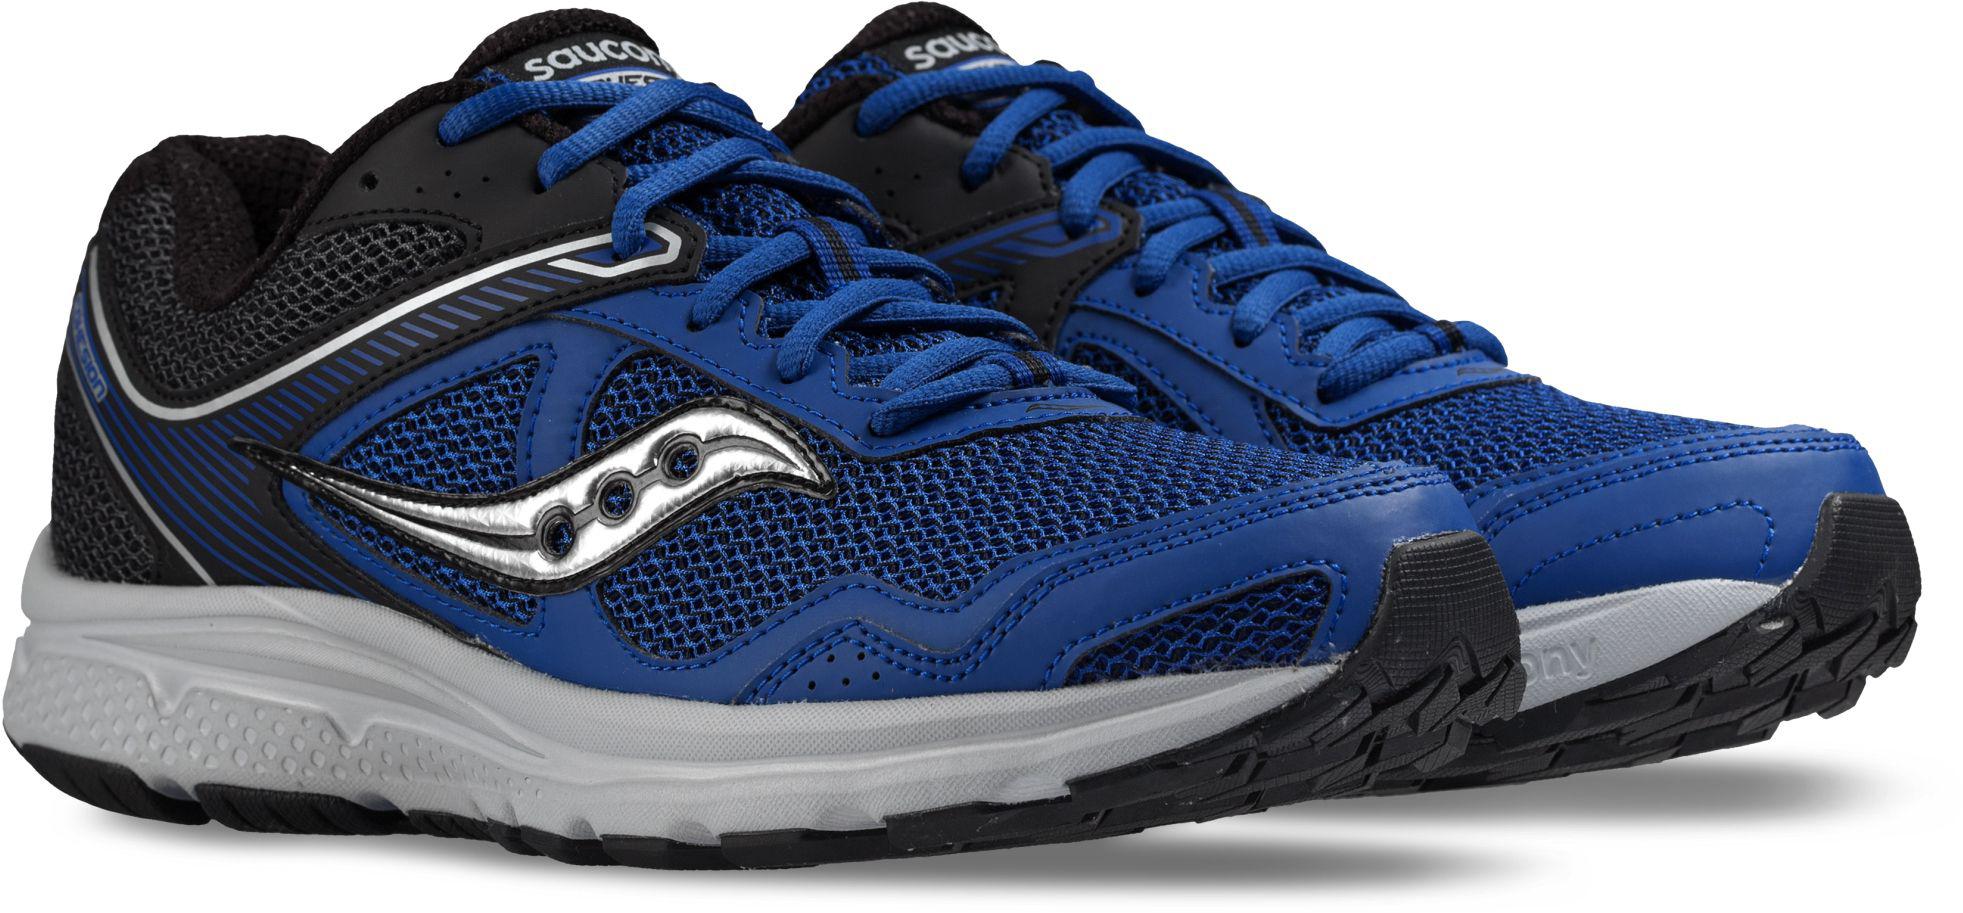 Saucony Cohesion 10 Running Shoes in Blue for Men - Lyst